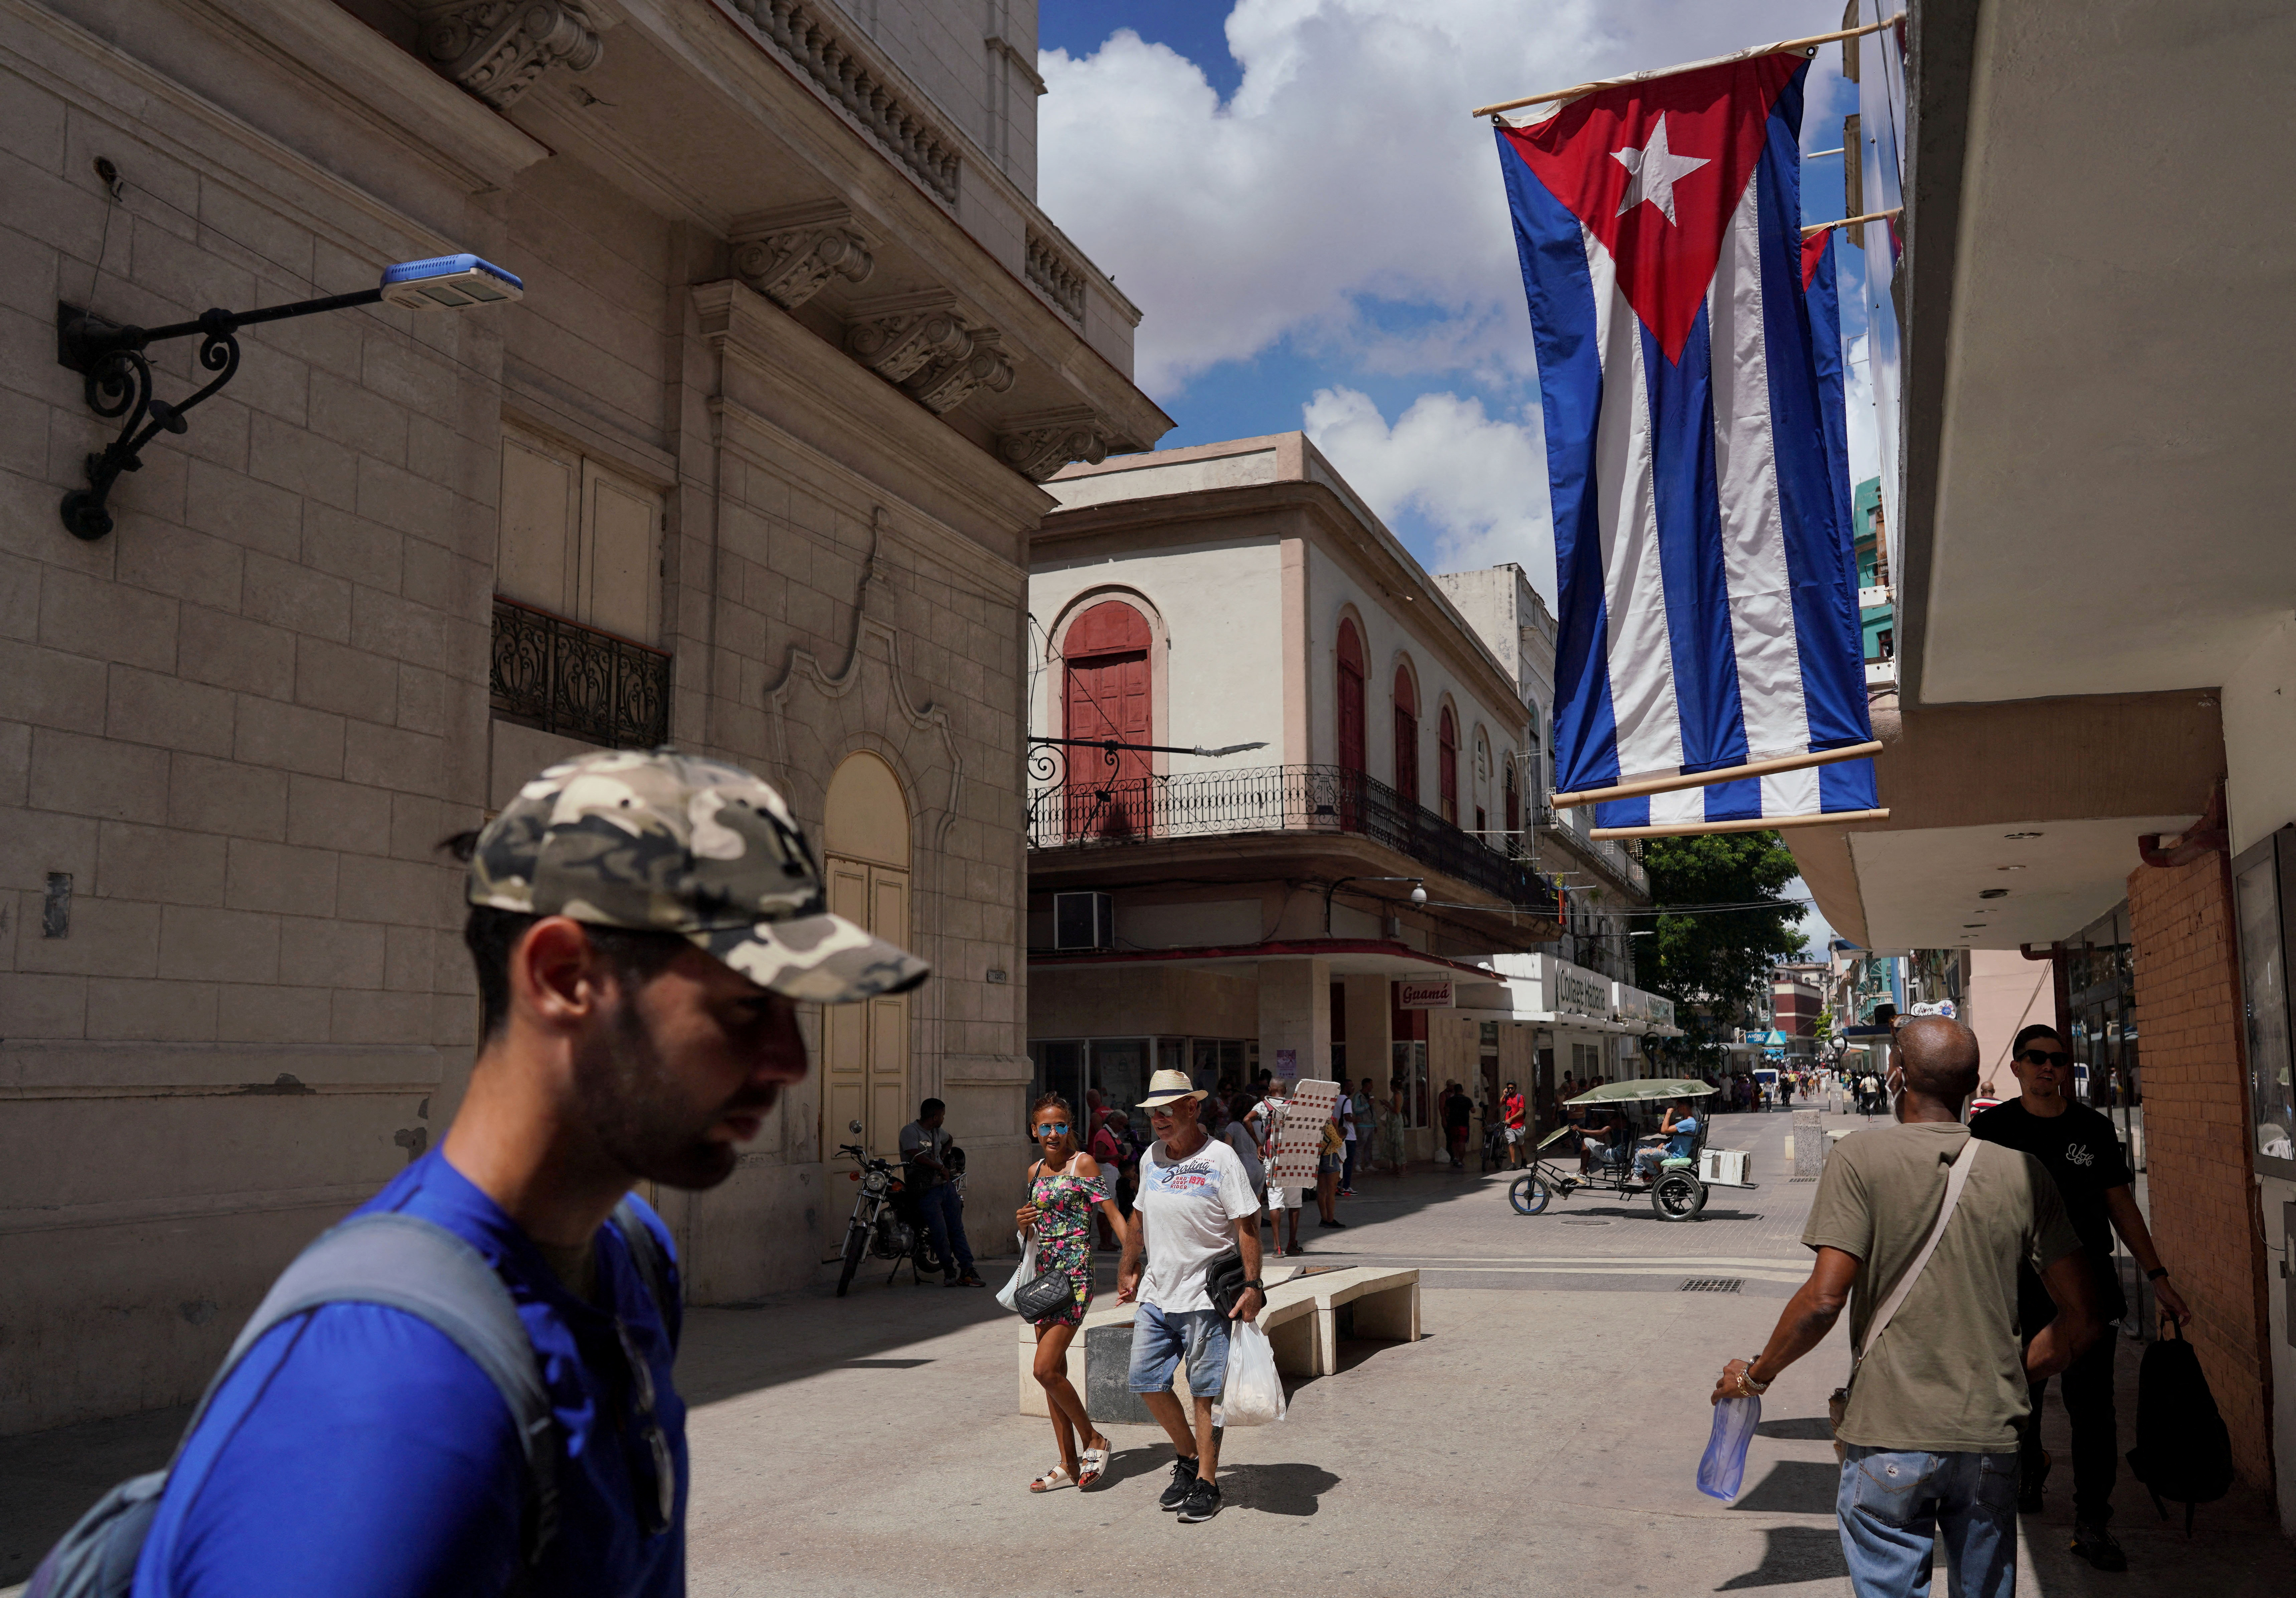 Cuban flags are displayed at a commercial road in Havana